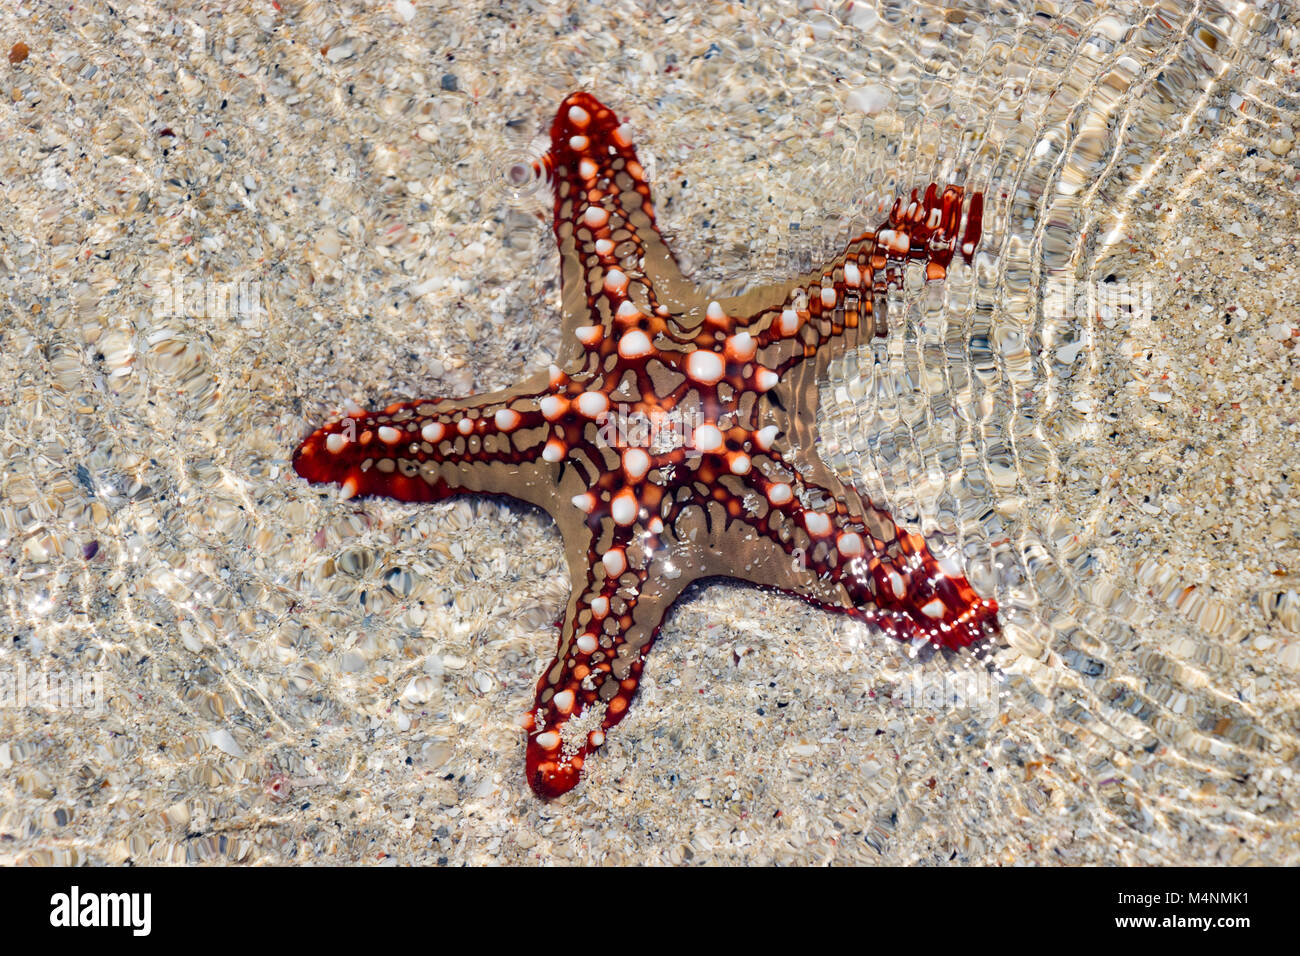 Colorful African red knob sea star or starfish in shallow water Stock Photo